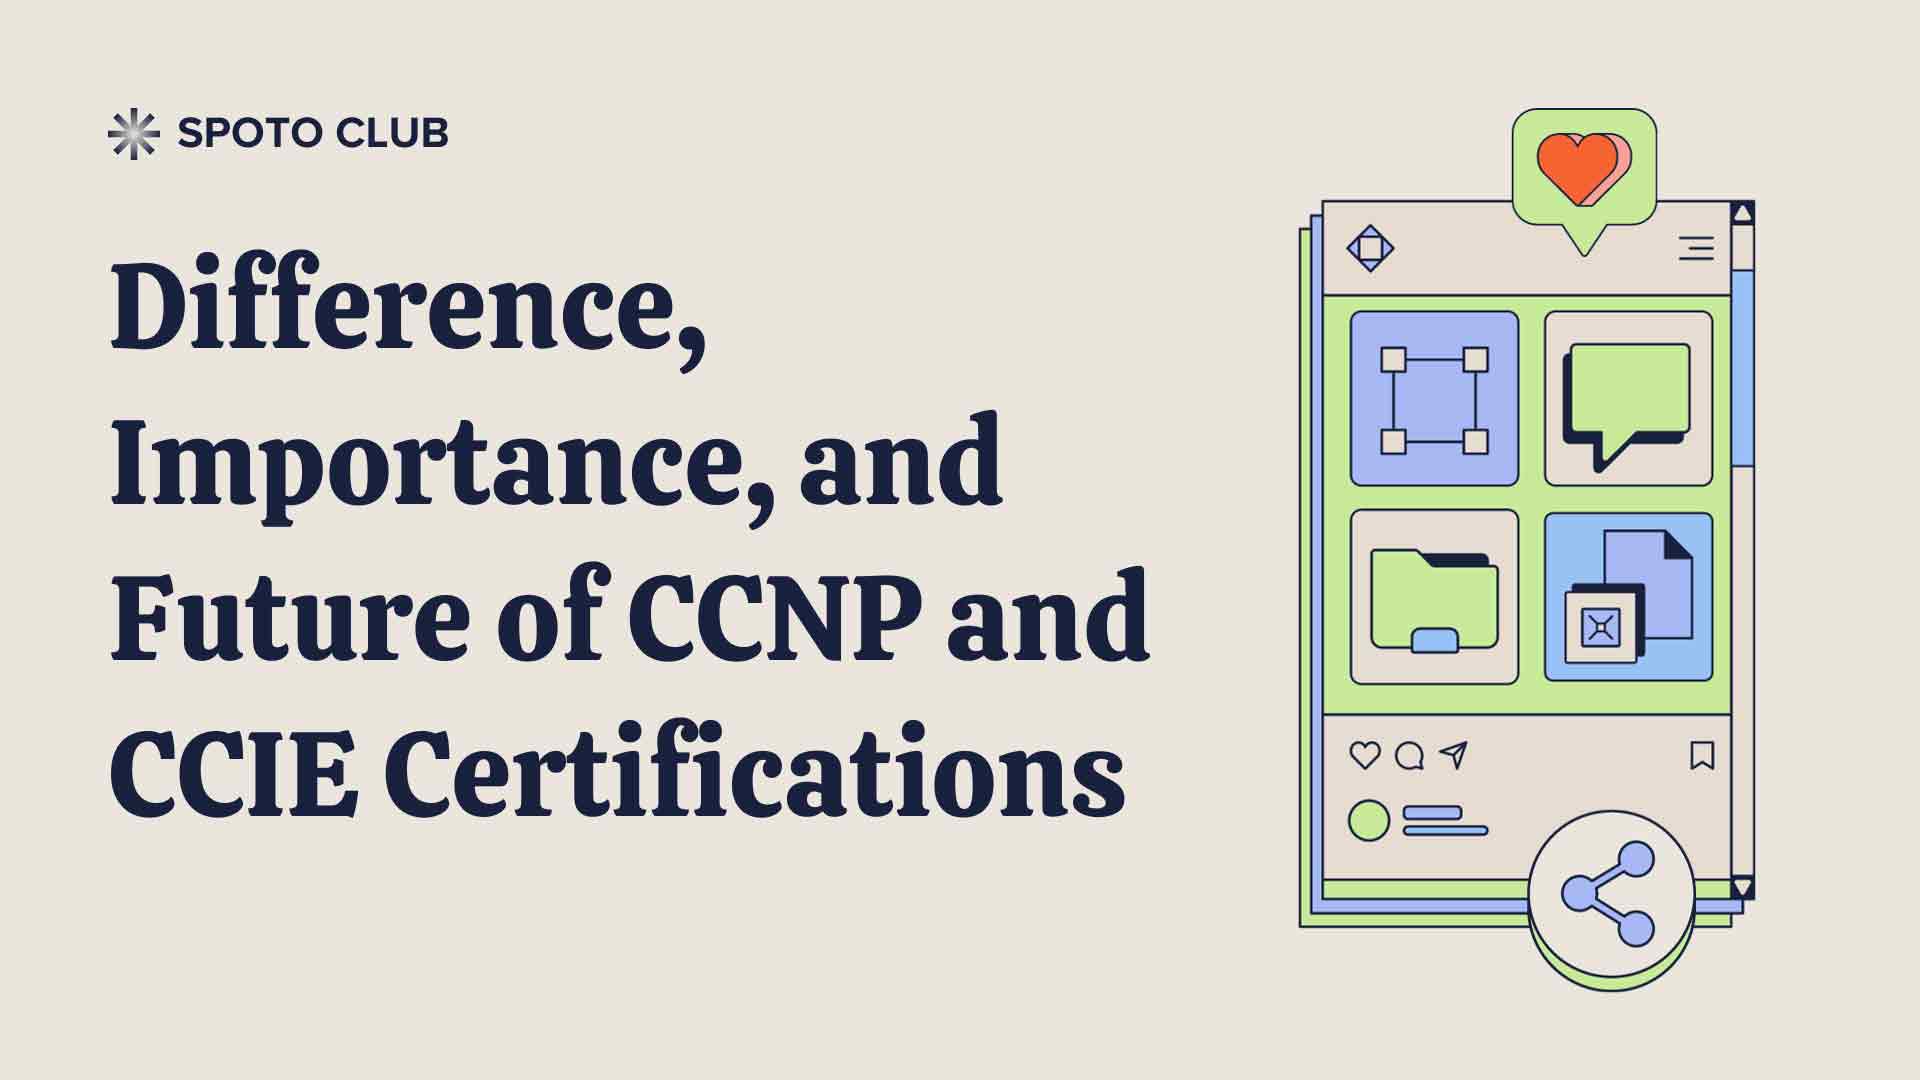 Understanding the Difference, Importance, and Future of CCNP and CCIE Certifications